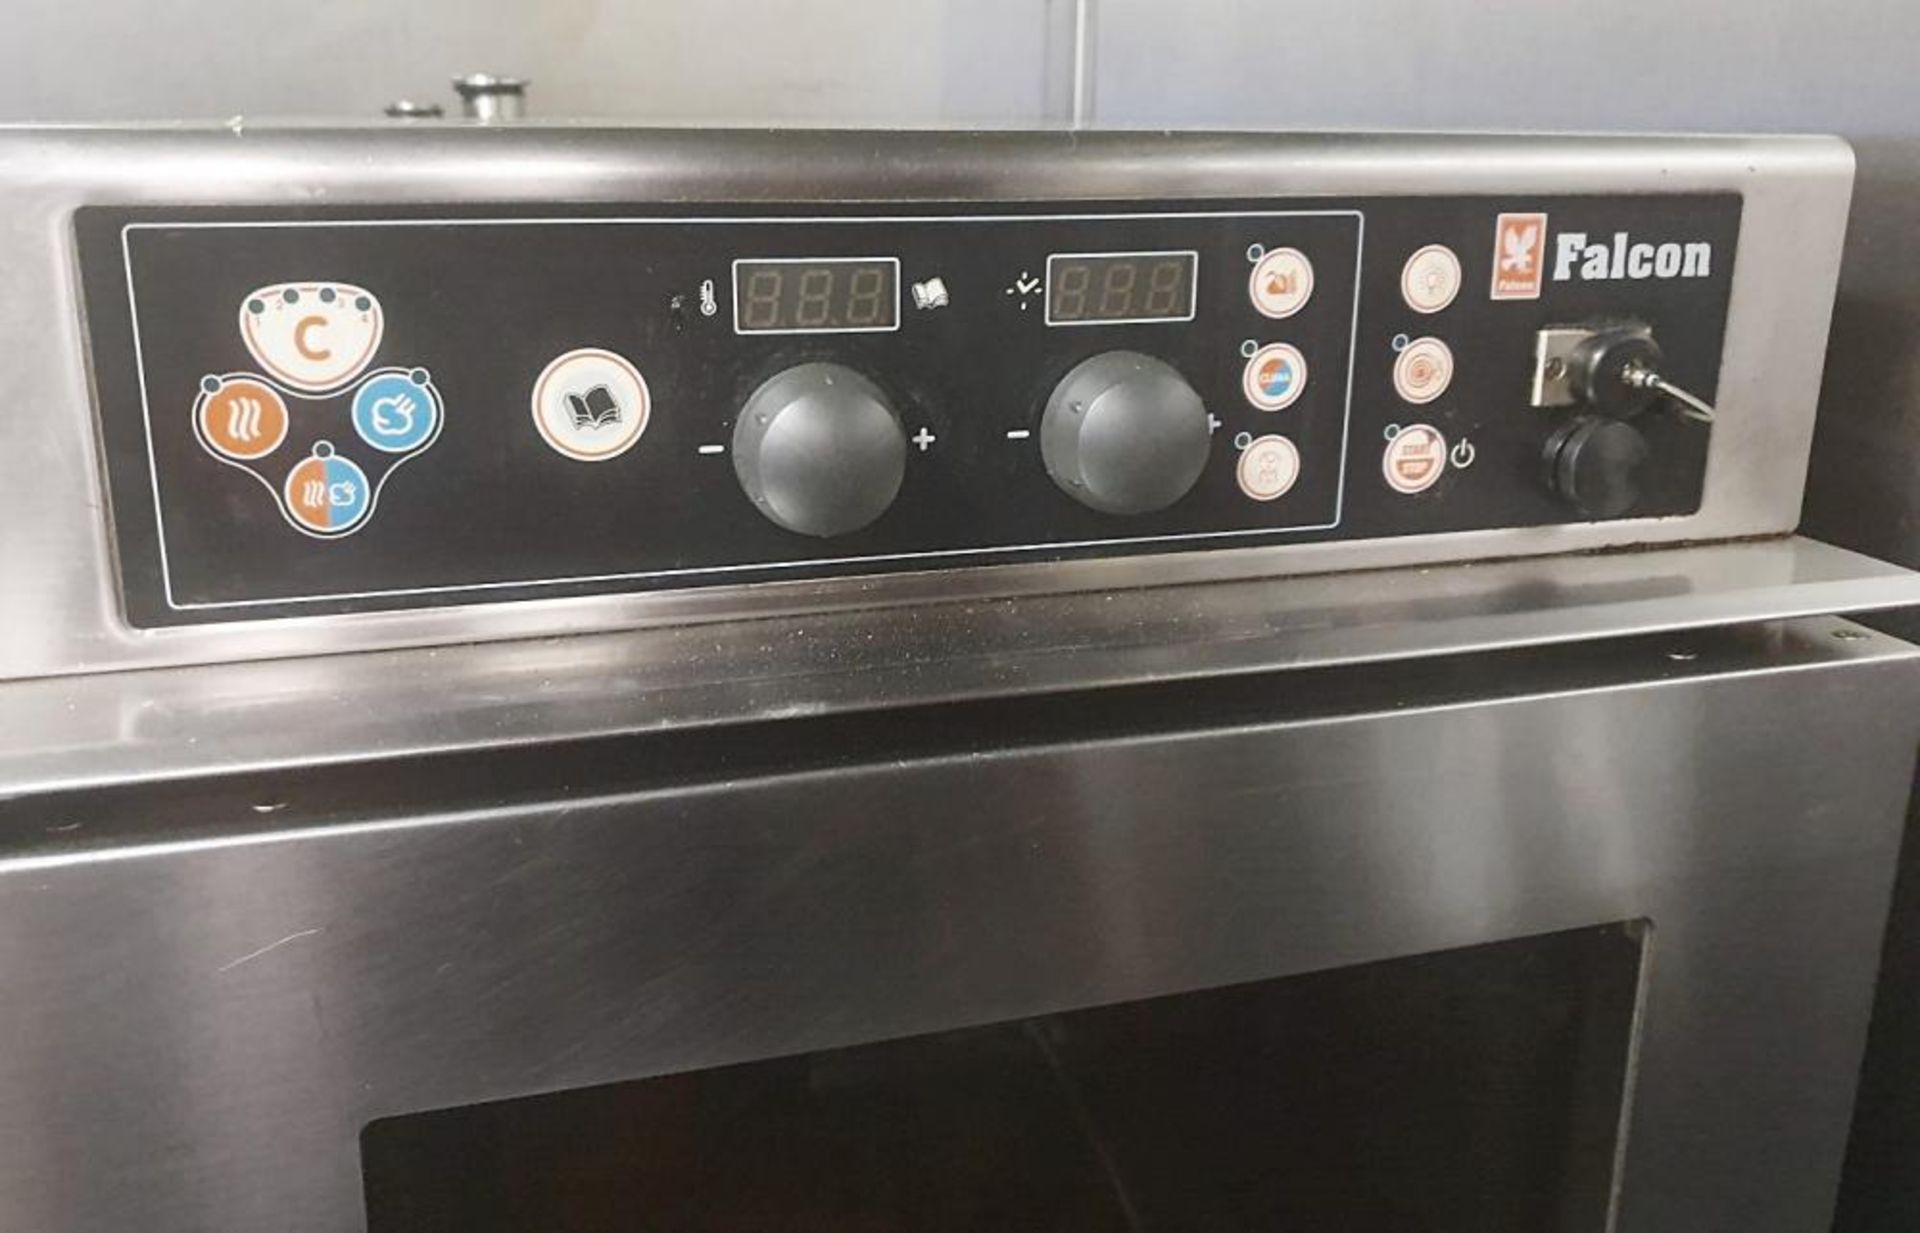 1 x FALCON Commercial 6-Grid Electric Combi Oven In Stainless Steel - Dimensions: 51 x 80 x H73cm + - Image 5 of 5